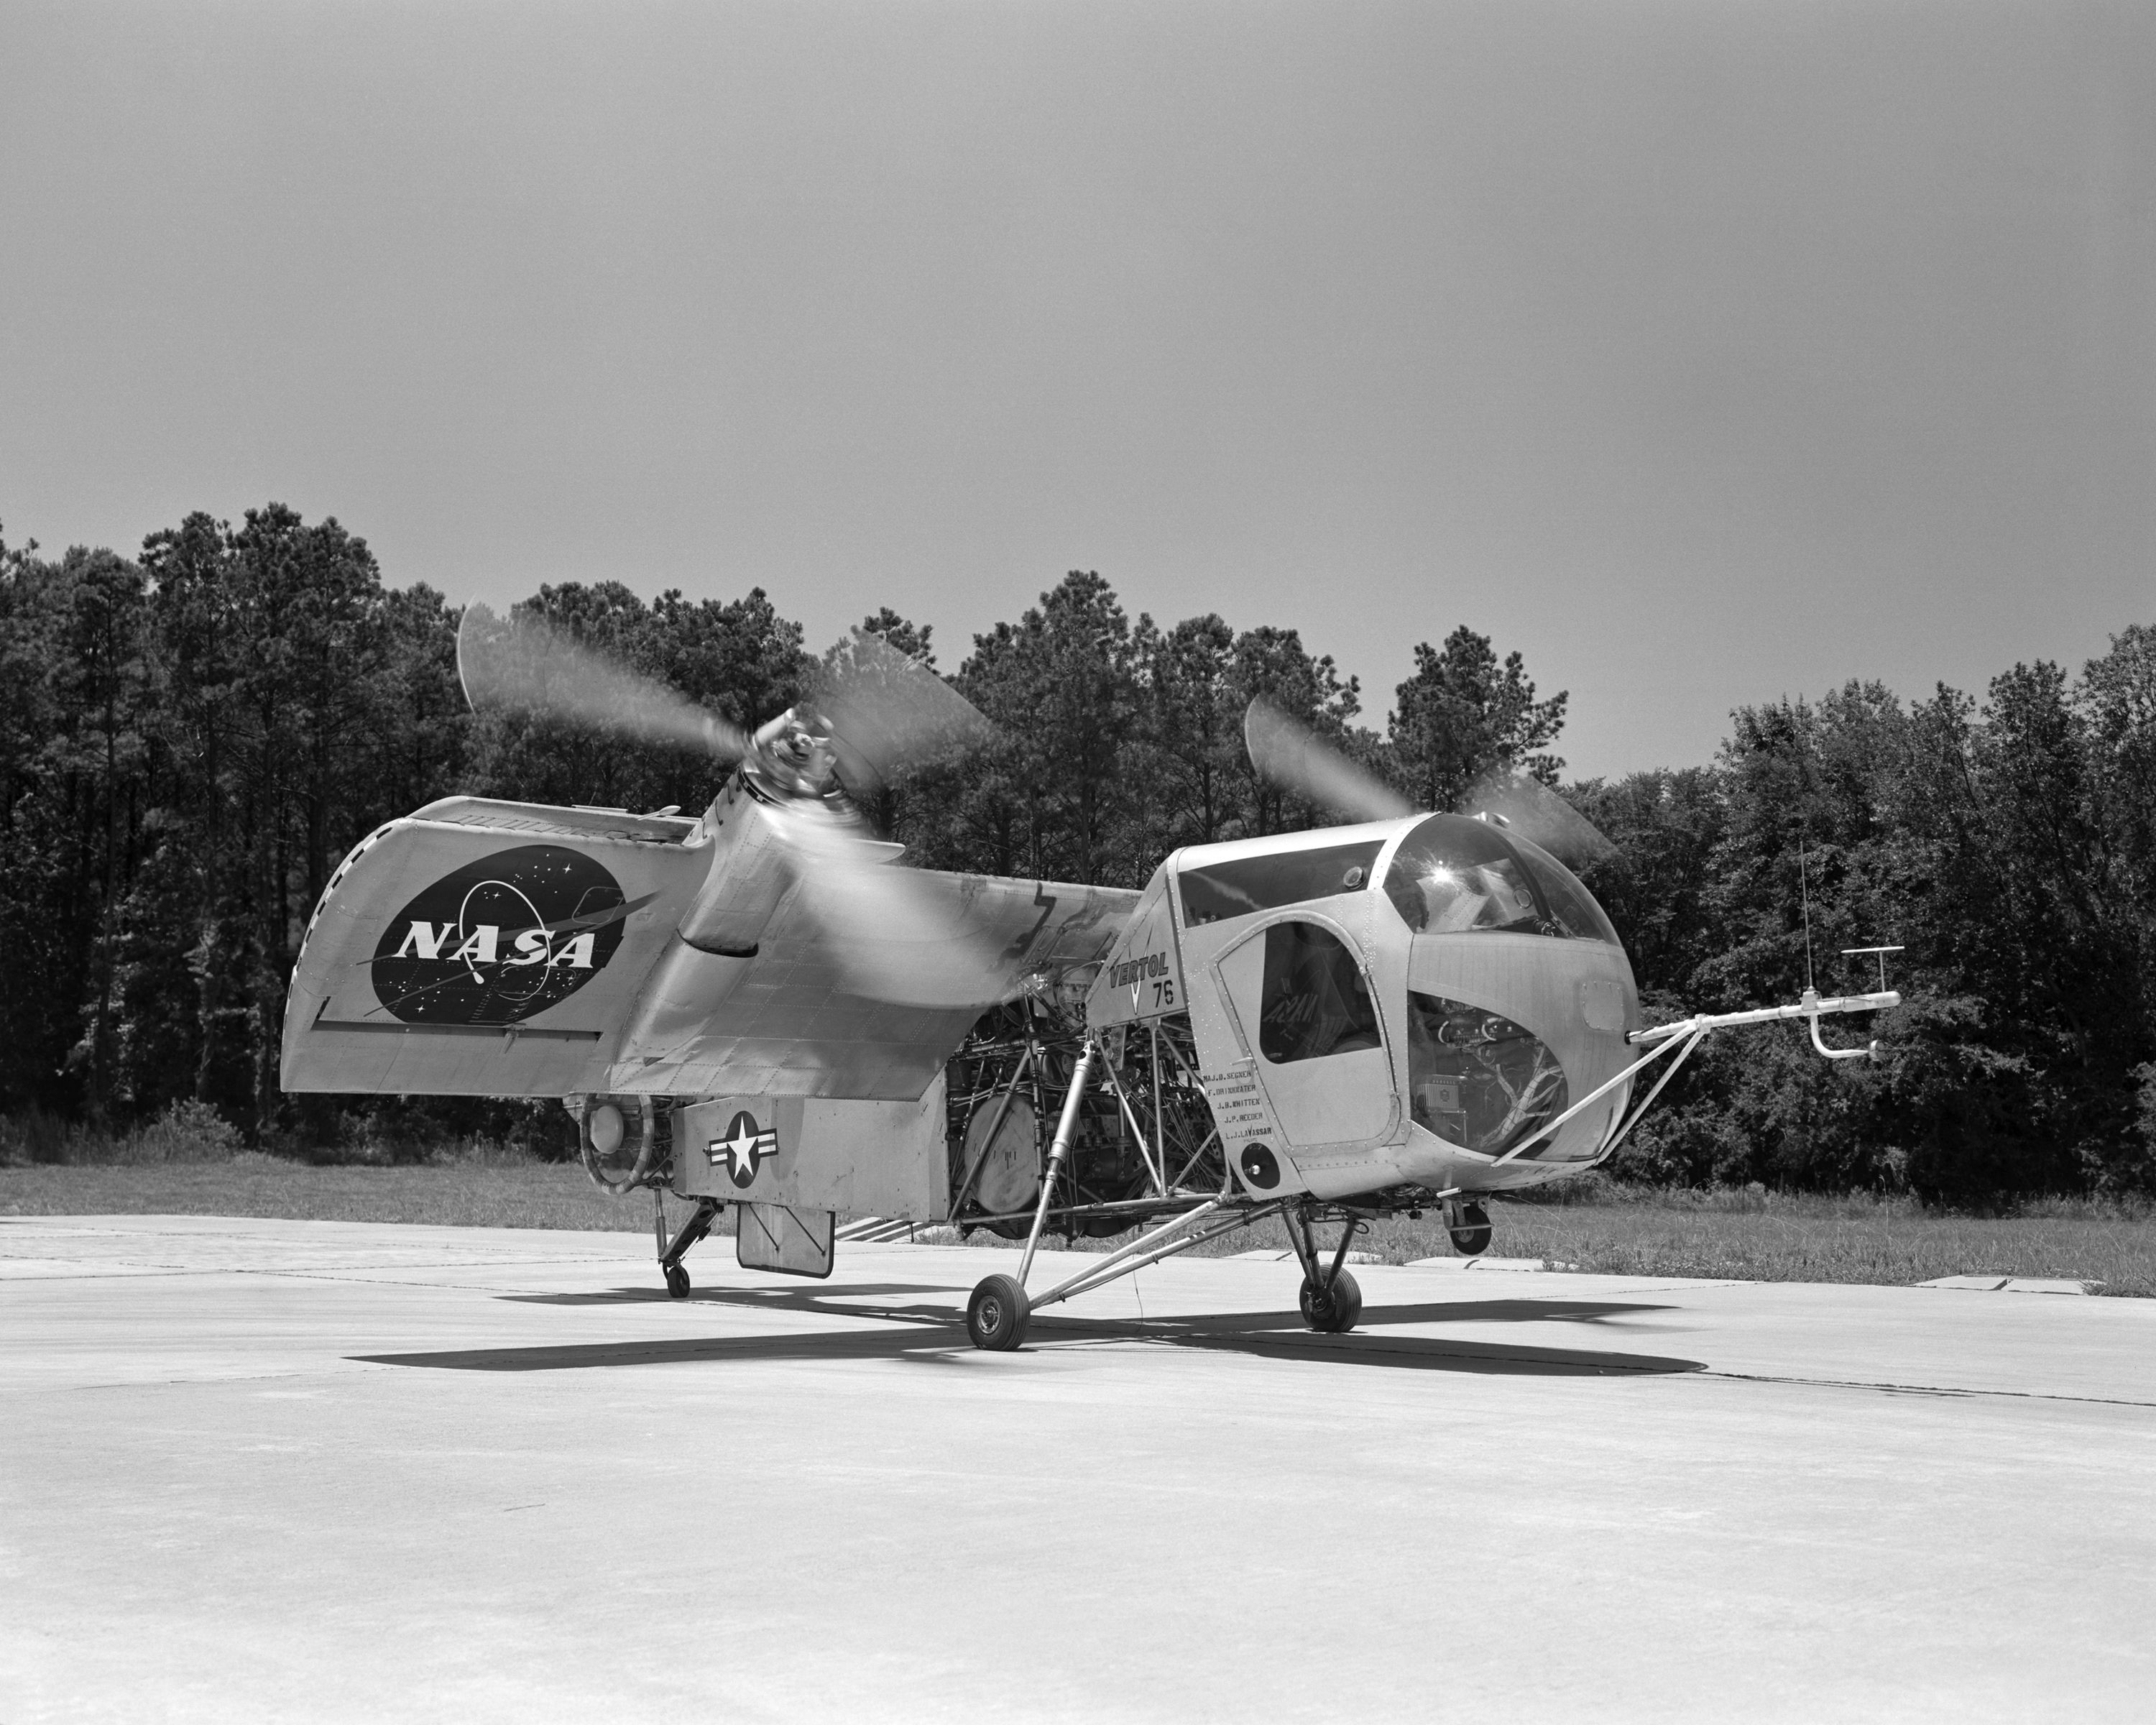 A Vertol VZ-2 about to take off.